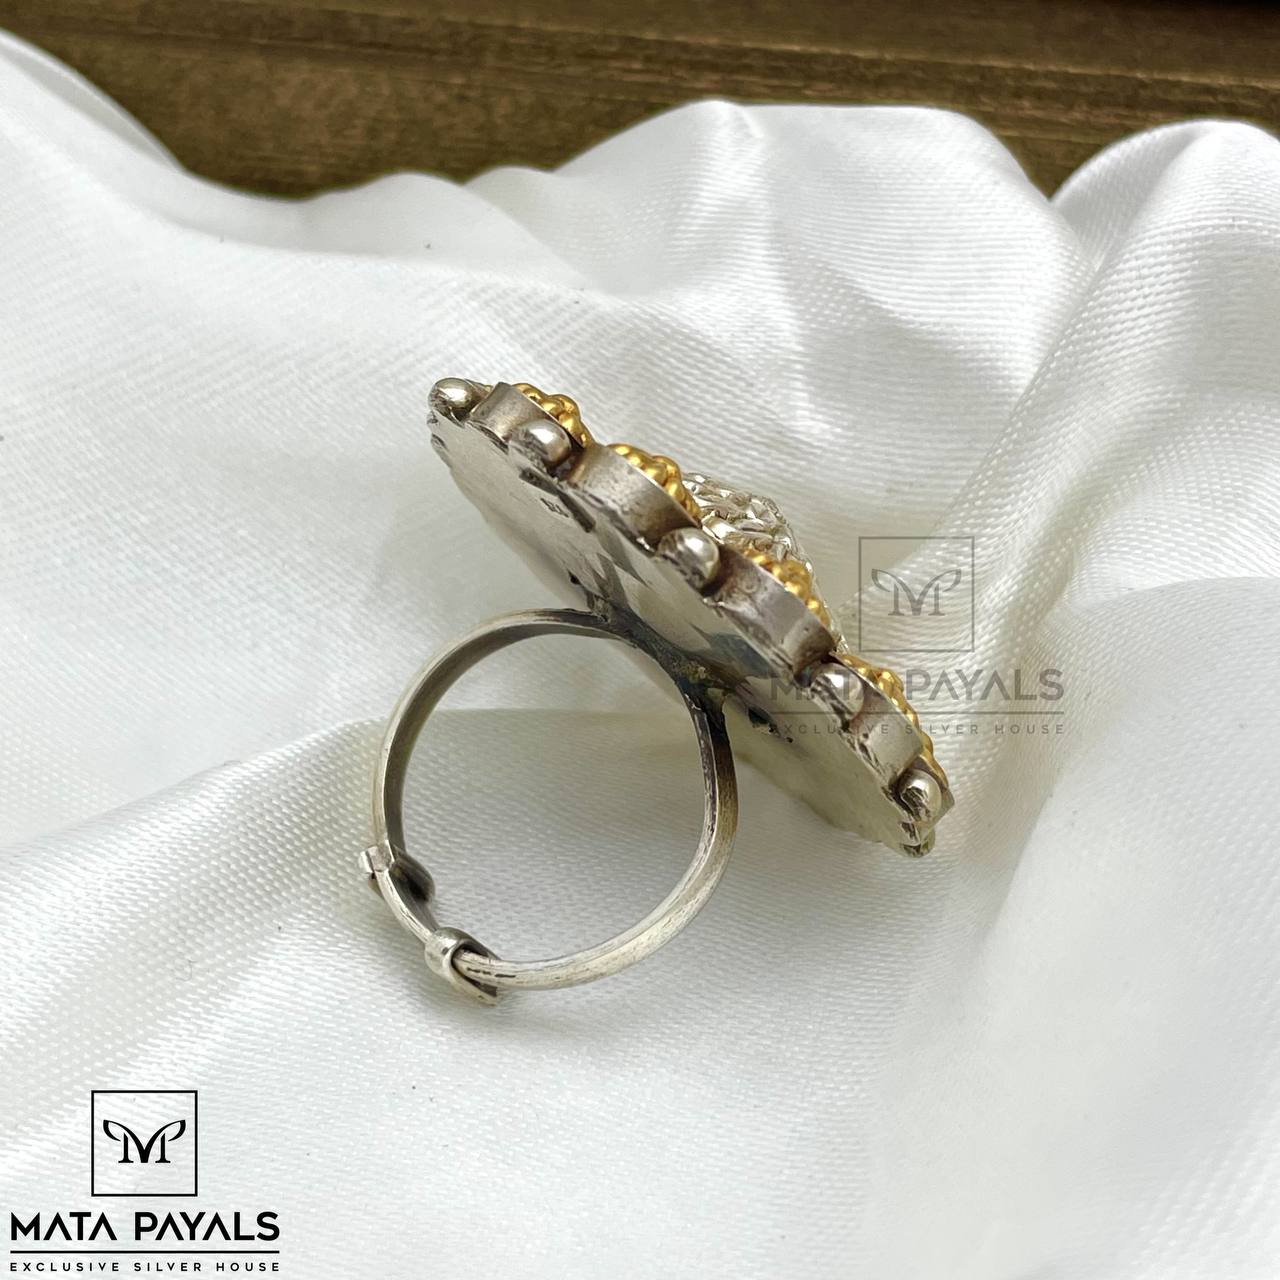 Silver Men's Finger Ring's - Mata Payals Exclusive Silver Jewellery